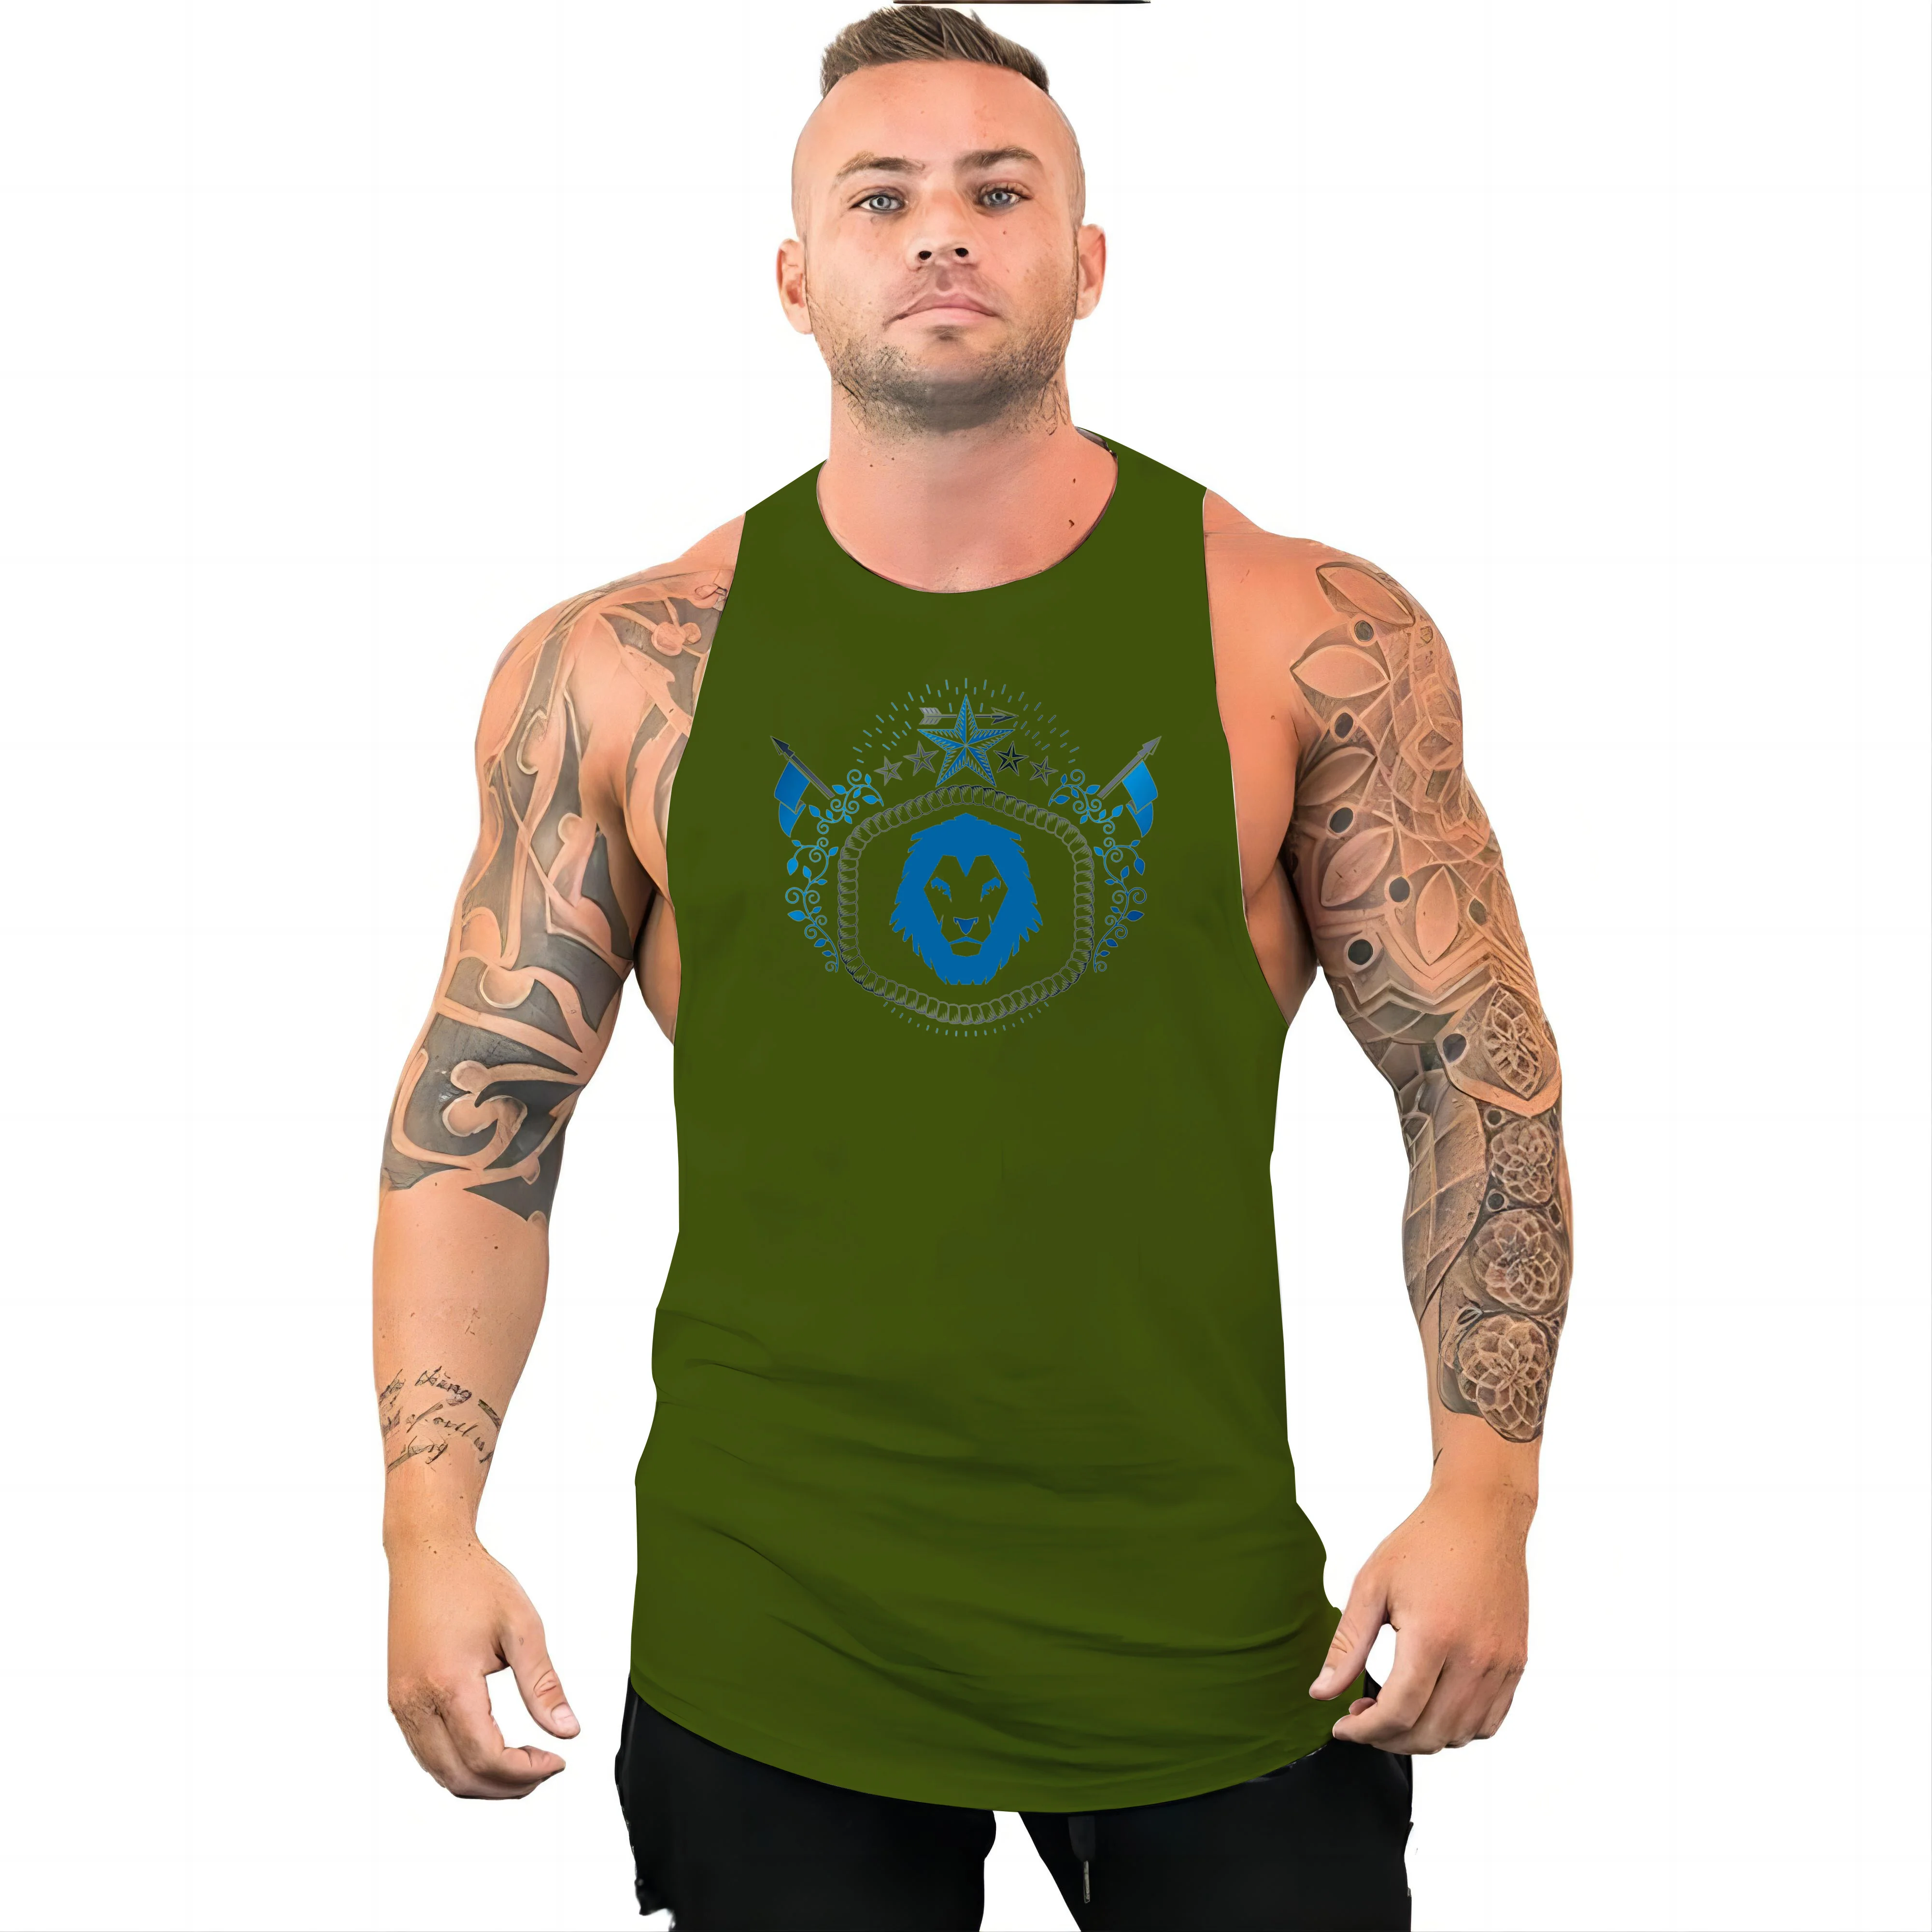 

2d Fun Printed Men'S Tank Top Gym Round Neck Basketball Sleeveless Outdoor Sports Quick Dry New Style Adult Clothing four Season